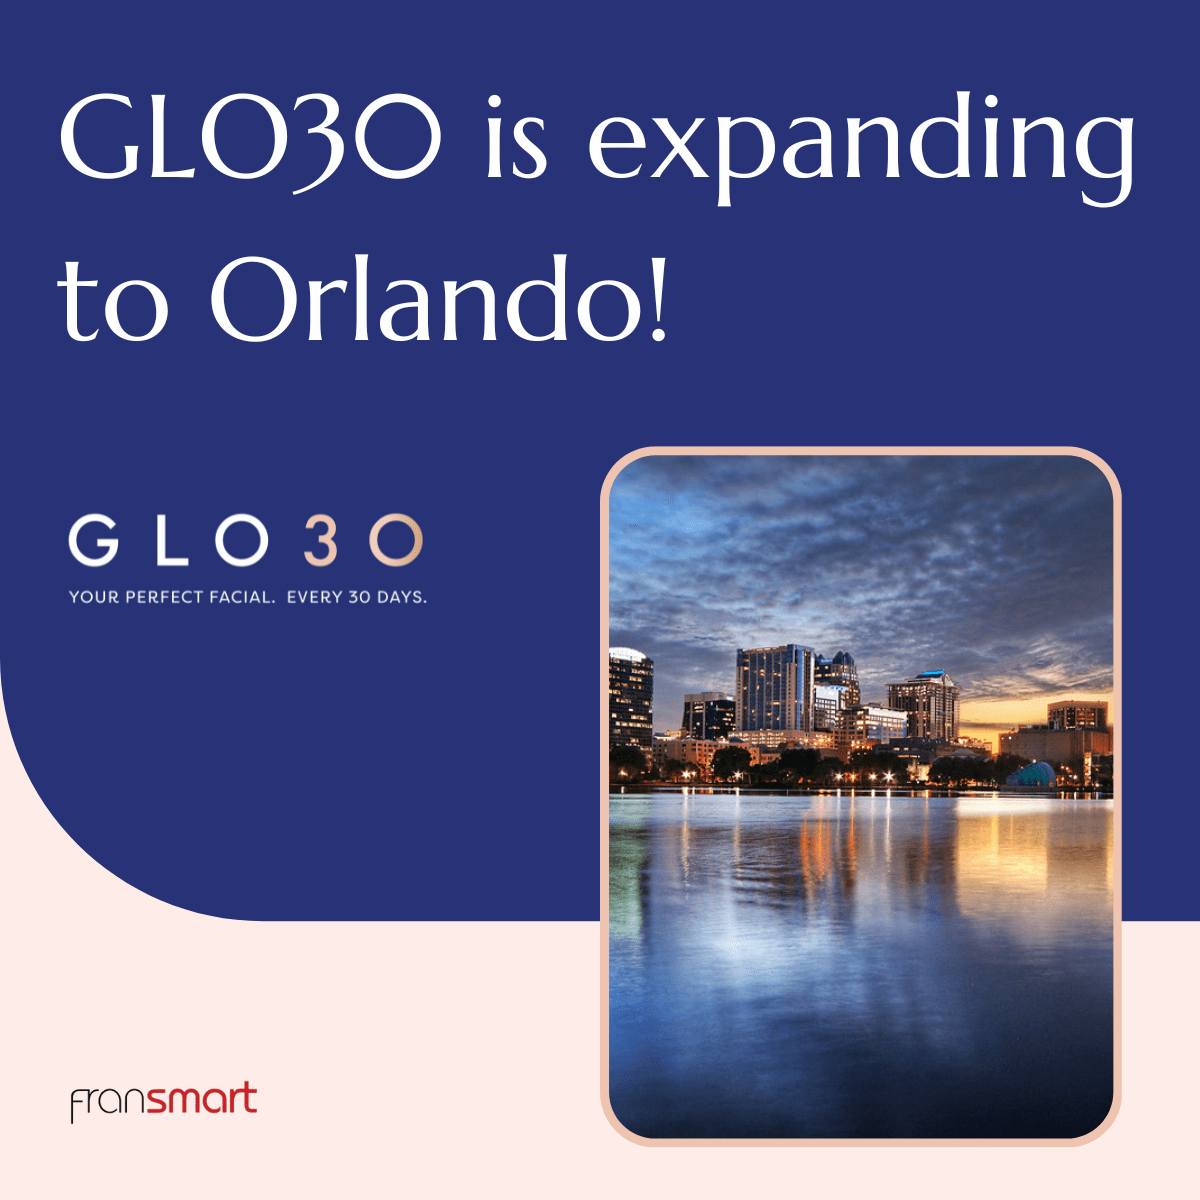 GLO30 Announces Franchise Expansion to Orlando, Florida, Bringing Proprietary Skincare Services to the Sunshine State